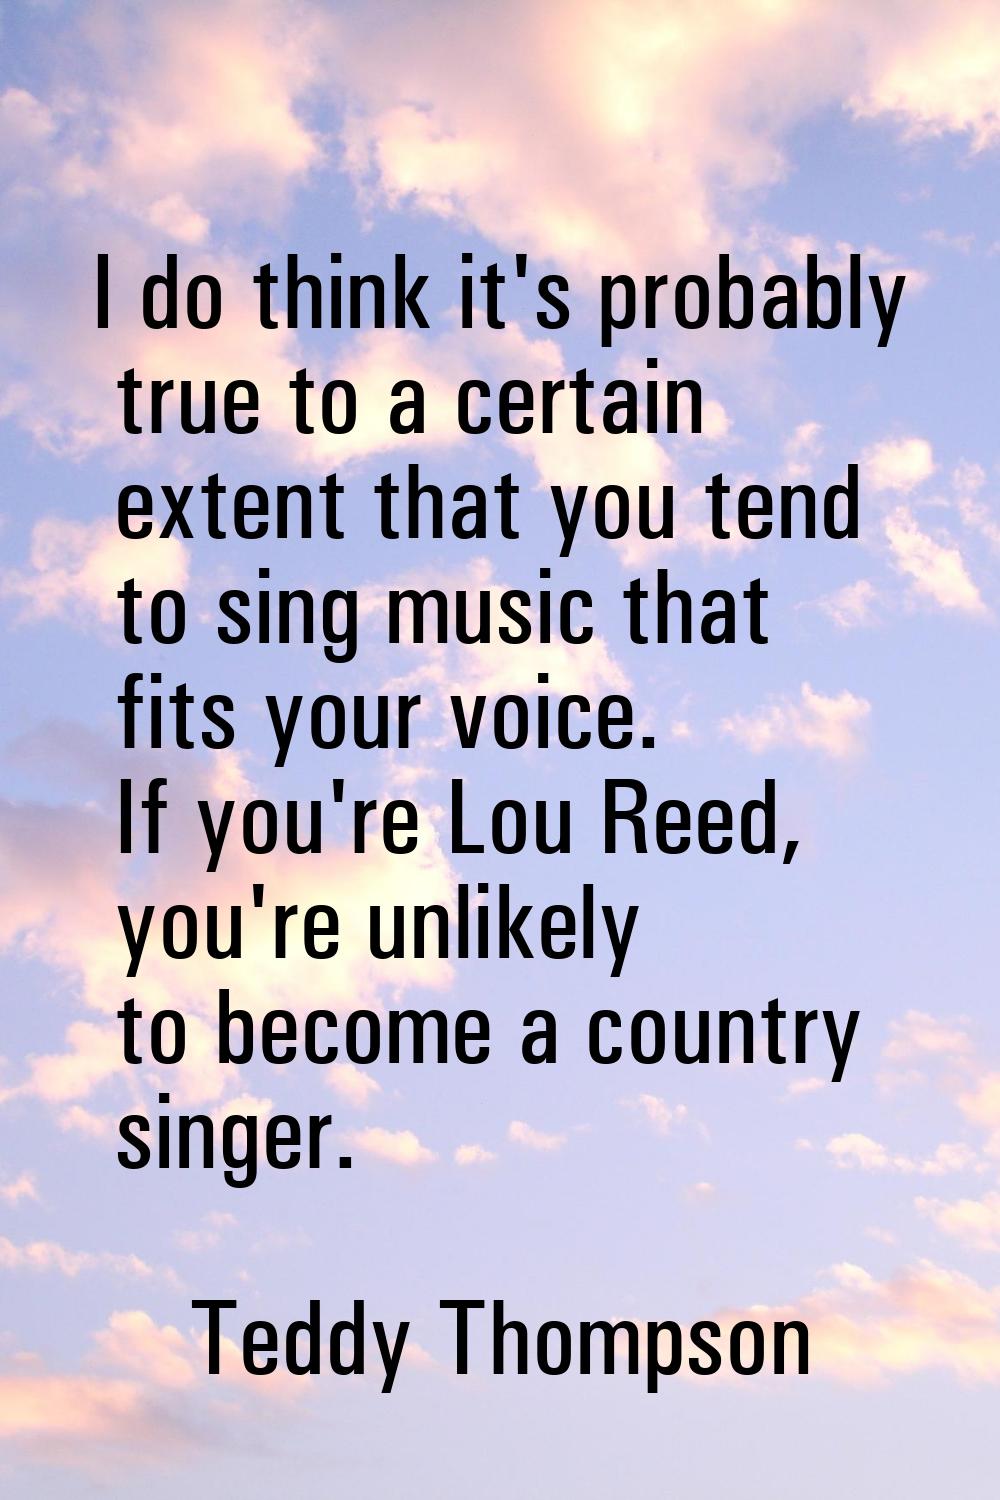 I do think it's probably true to a certain extent that you tend to sing music that fits your voice.